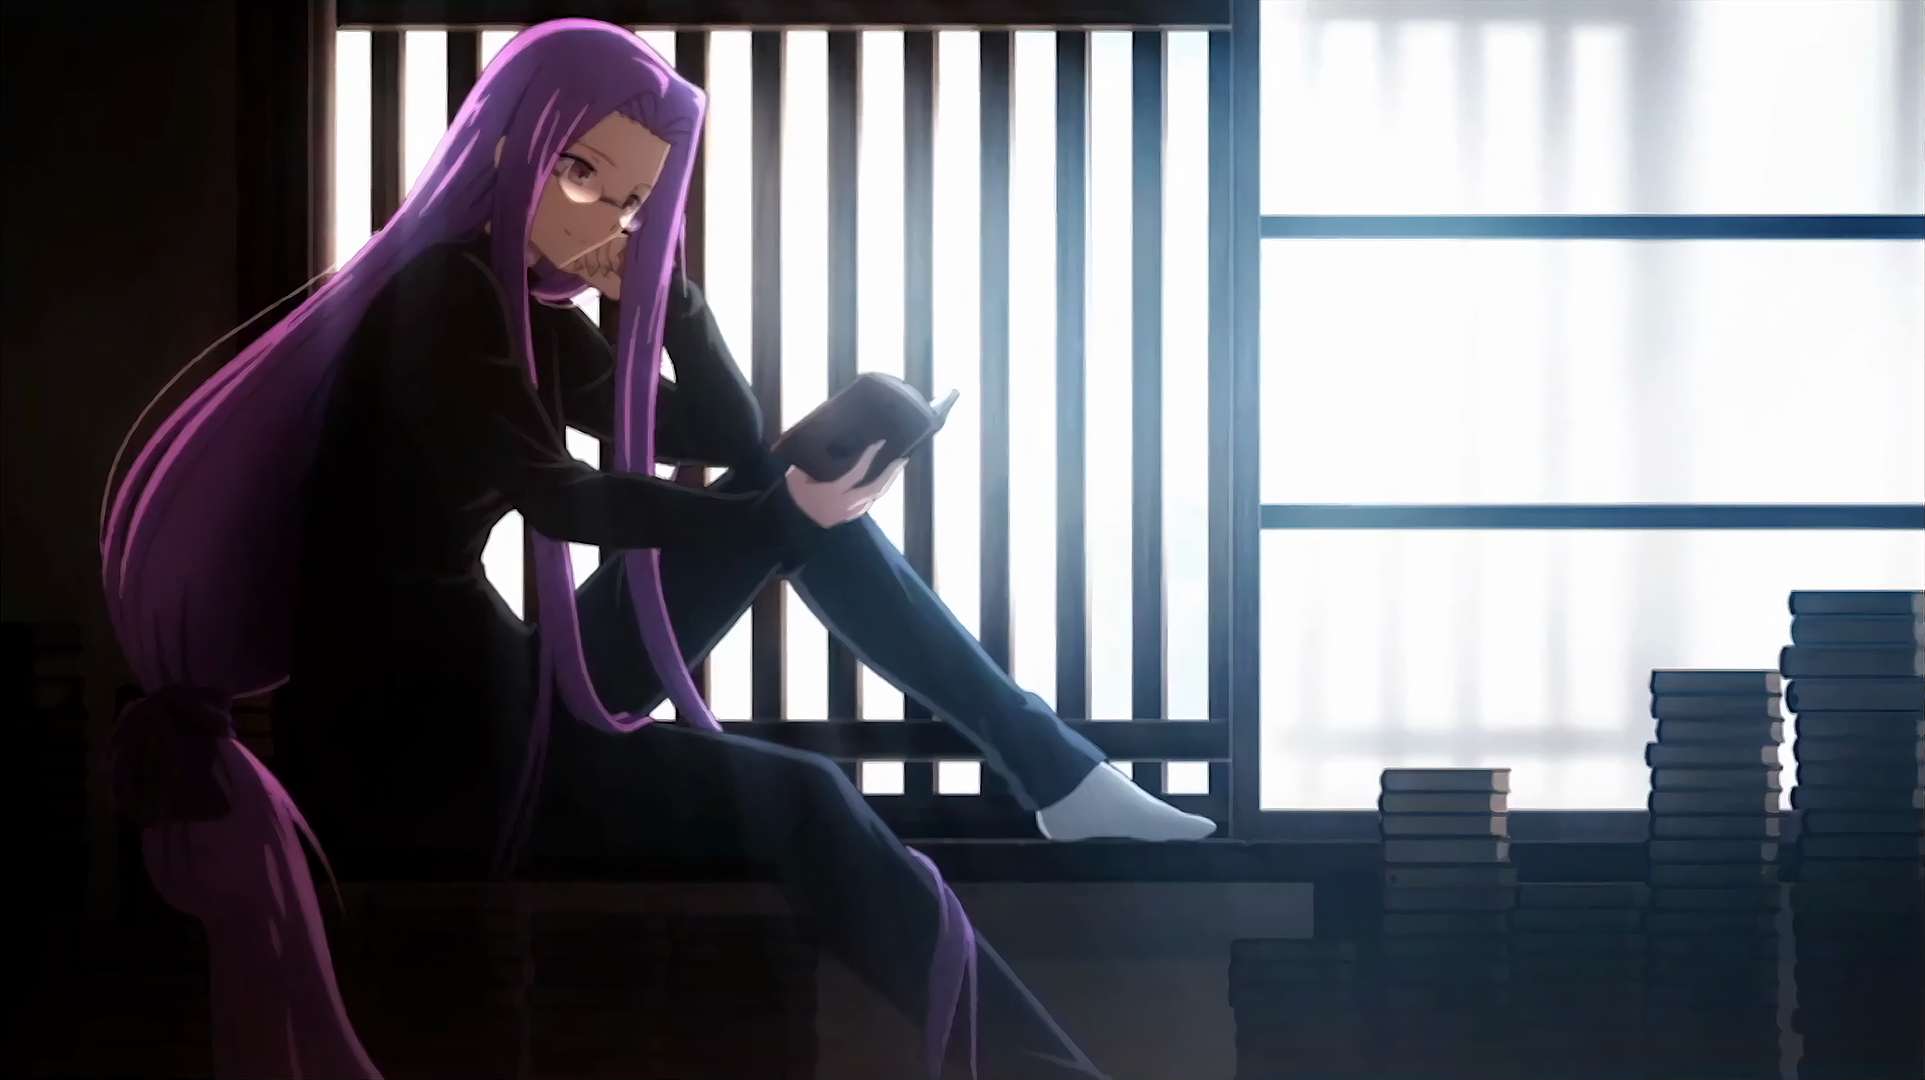 Ufotable's F HA Casual Rider [1920x1080] Need #iPhone S #Plus #Wallpaper #Background For #IPhone6SPlus? Follow IPhone 6S P. Fate Stay Night Anime, Fate, Medusa